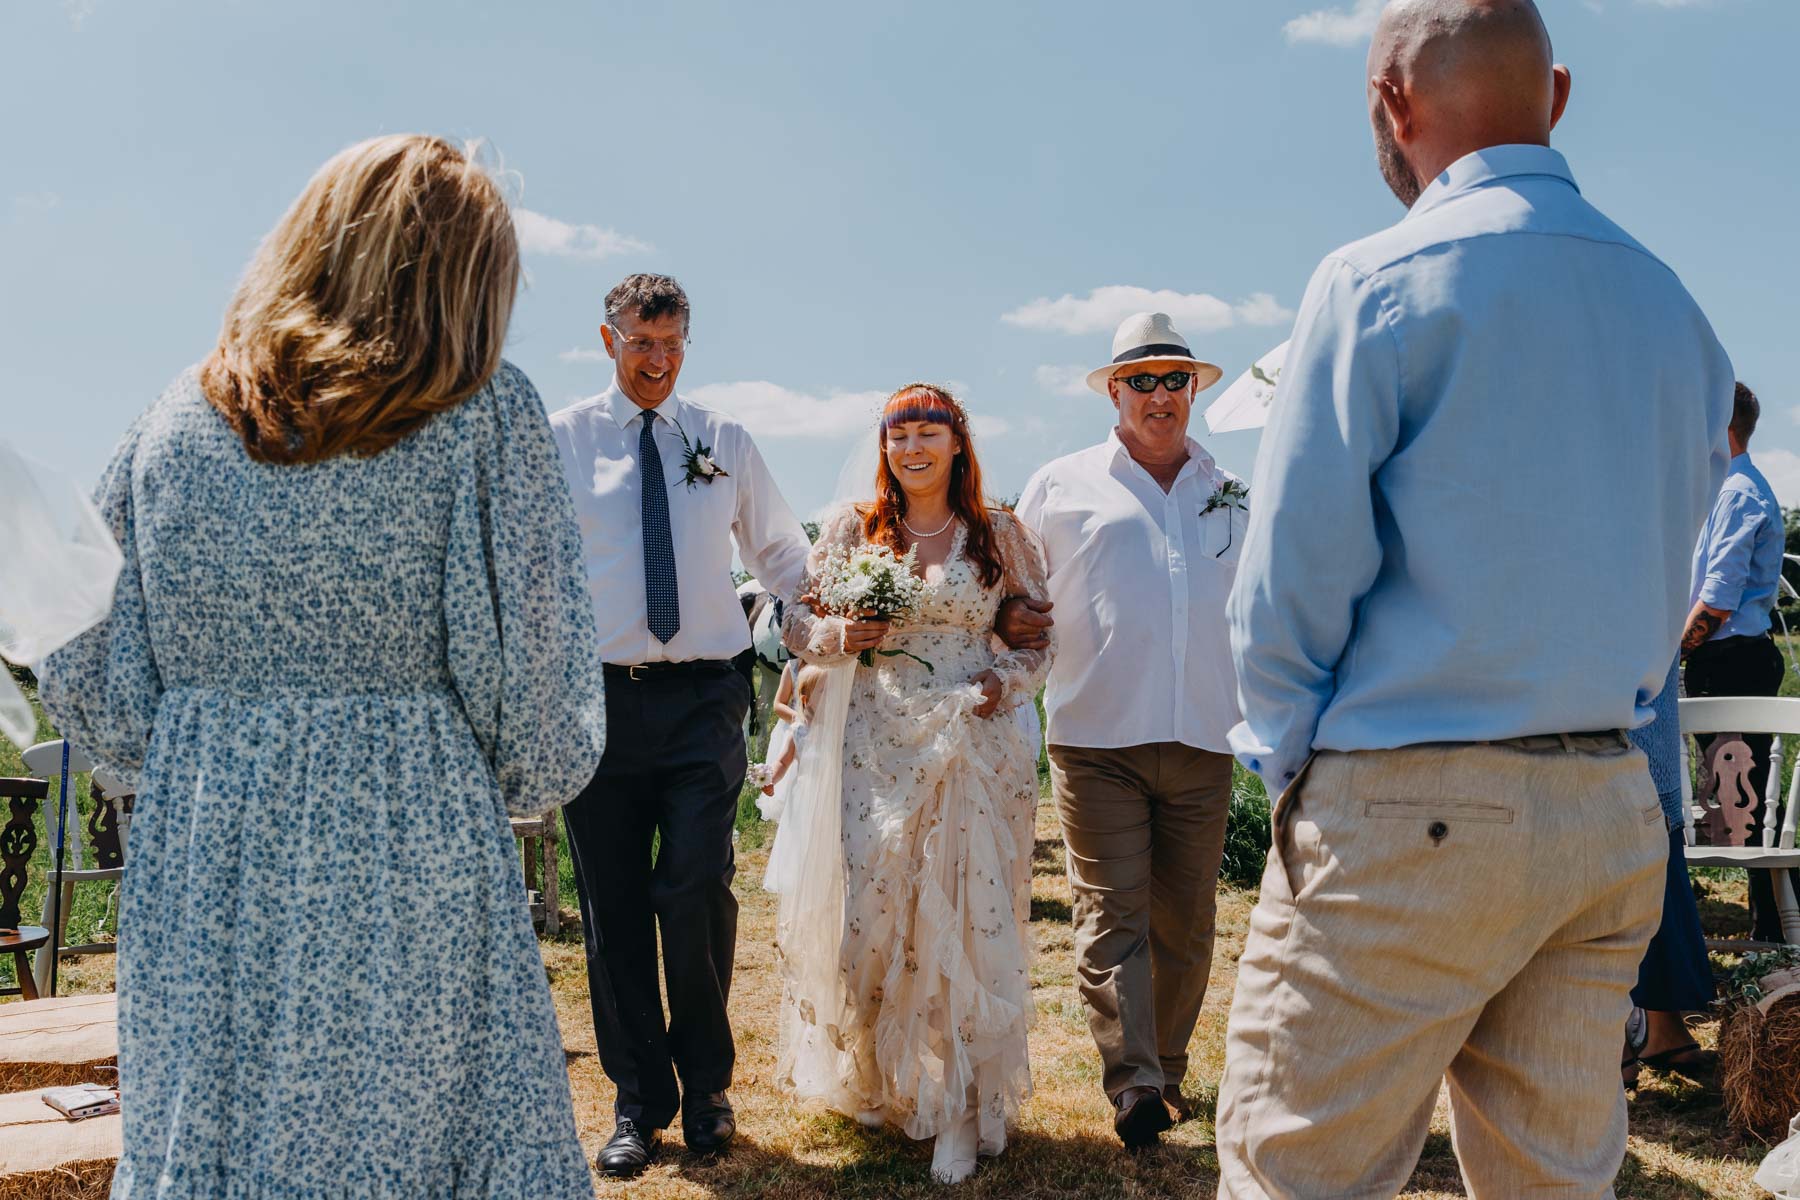 The bride with her father and stepfather approaches the groom and their celebrant of the handfasting ceremony